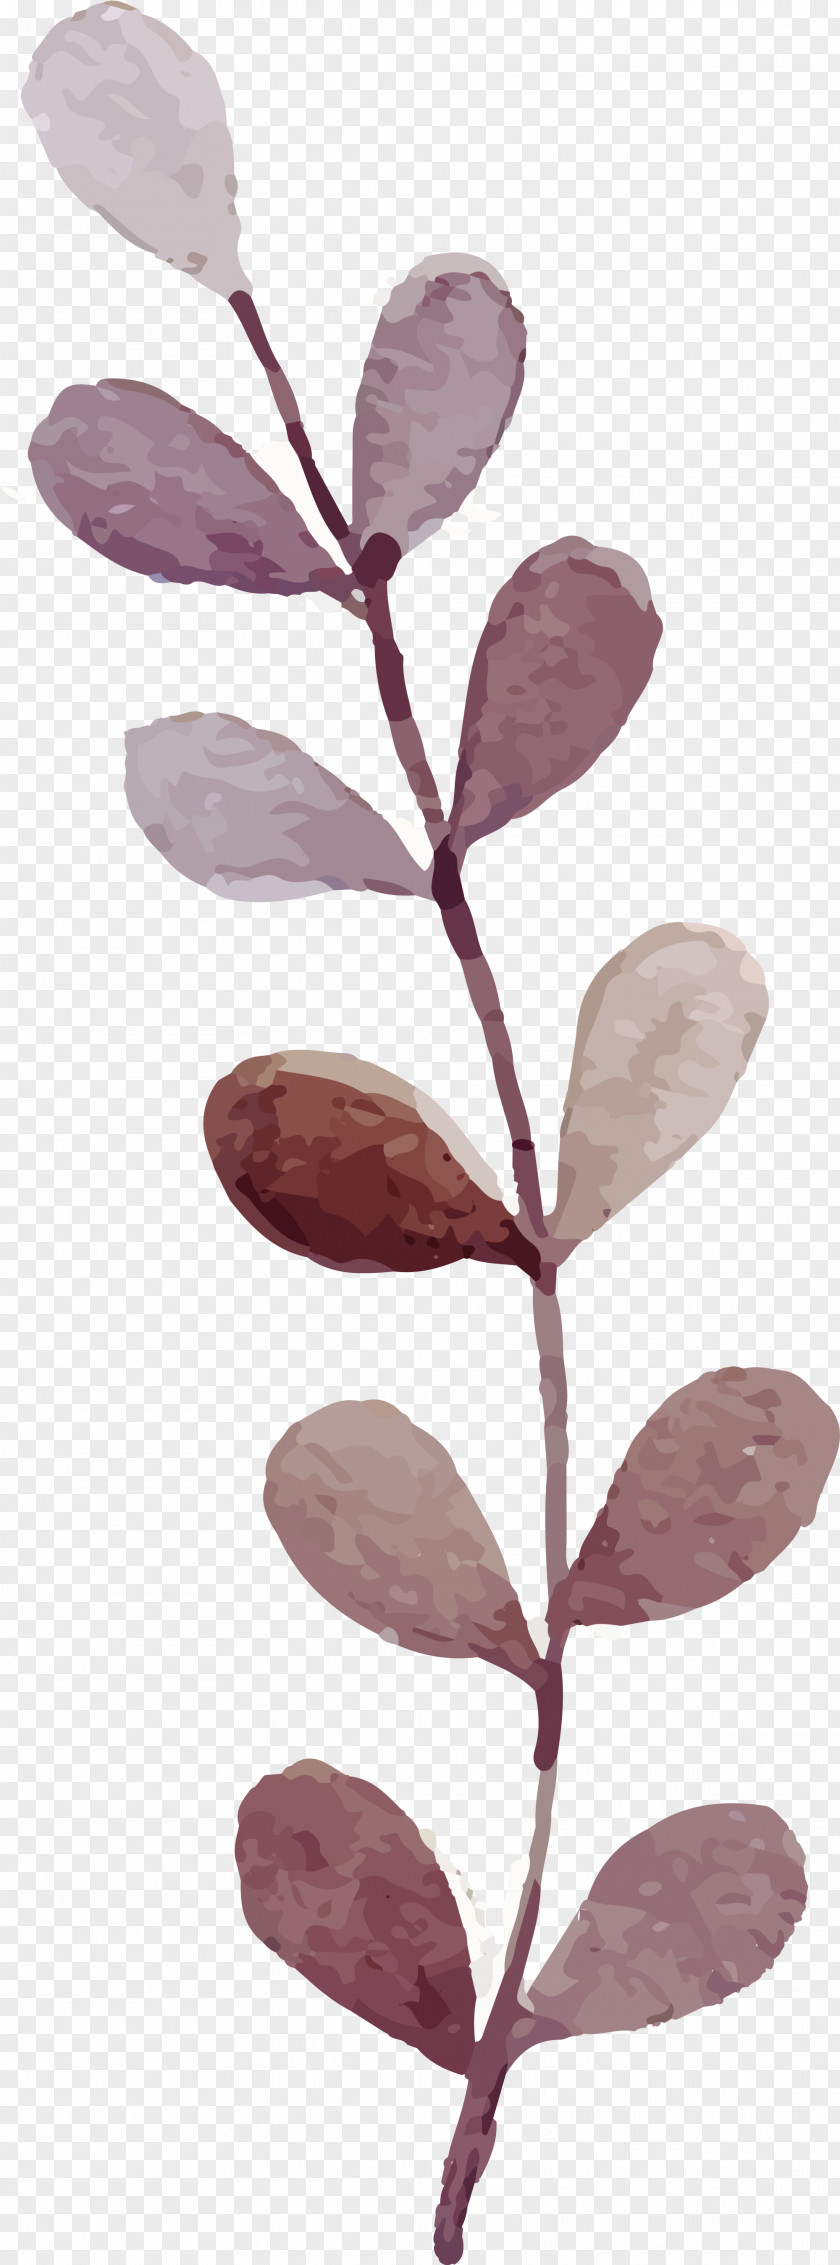 A Coffee Colored Watercolour Plant Watercolor: Flowers Watercolor Painting PNG